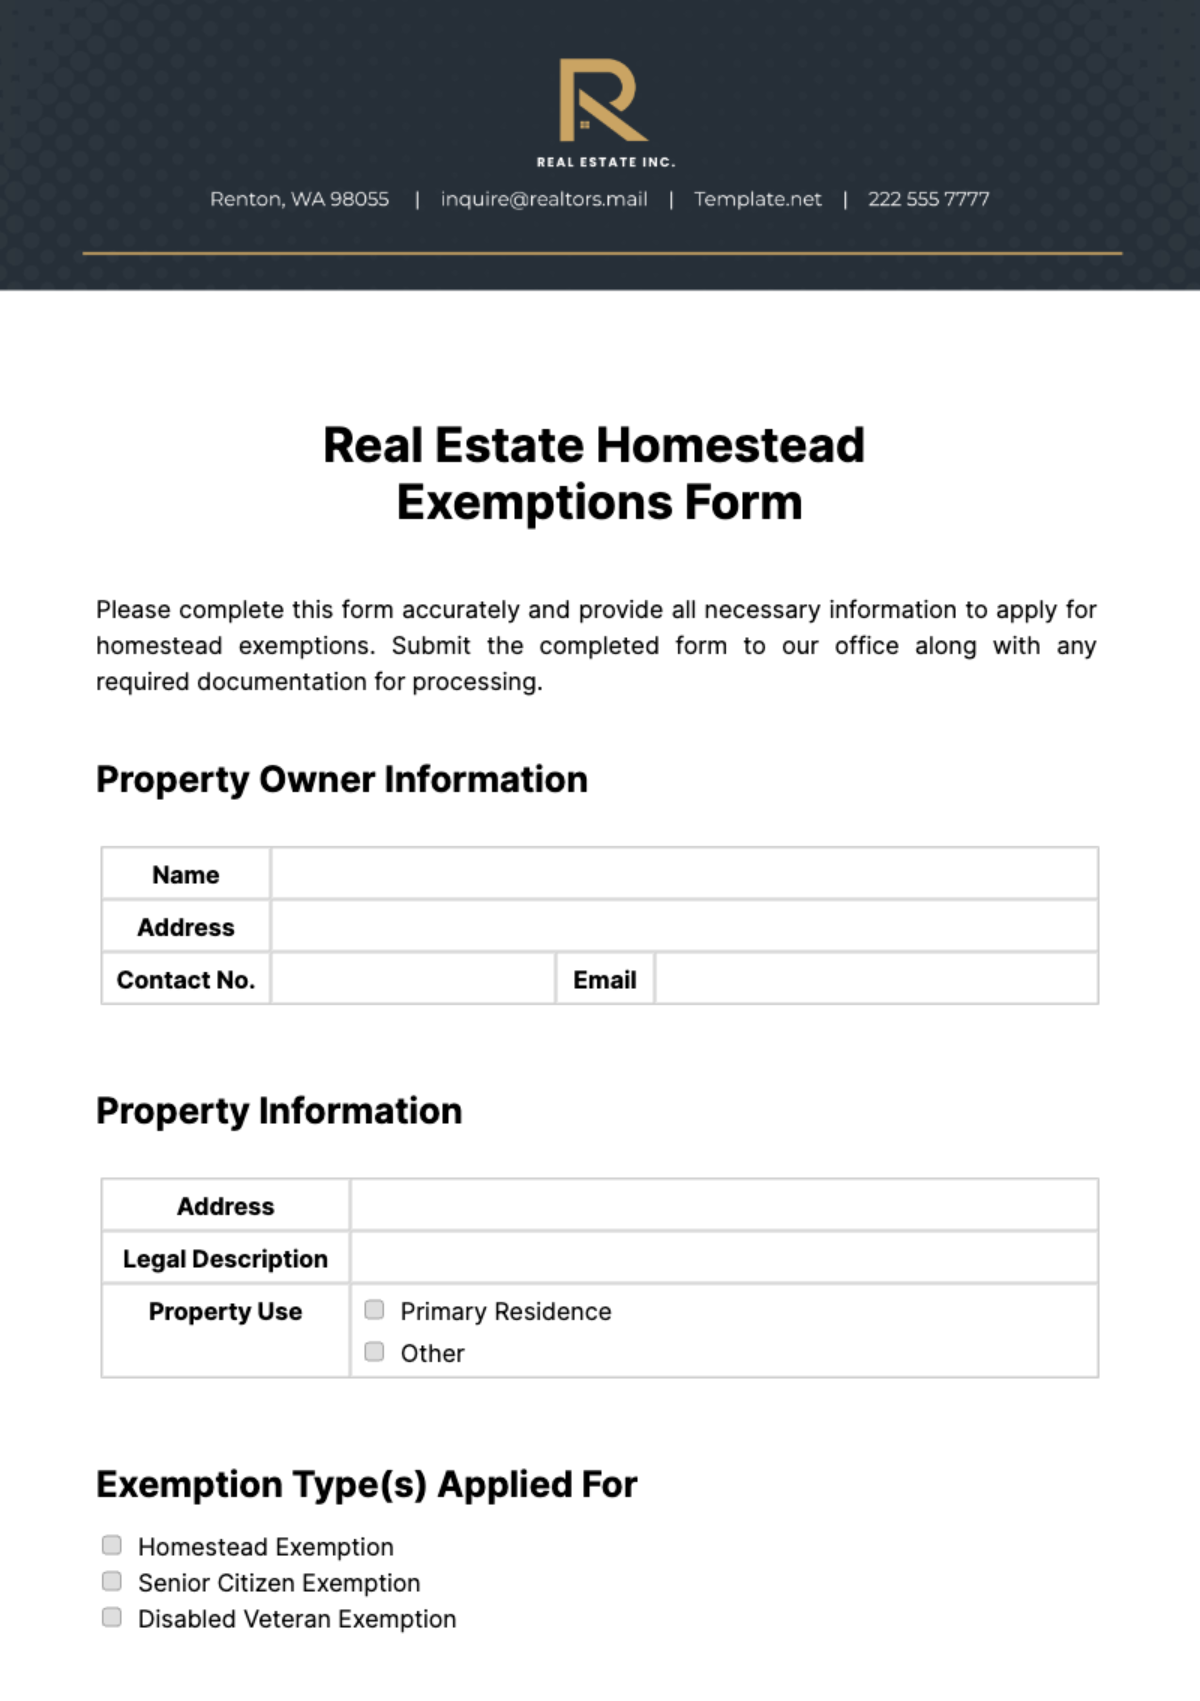 Real Estate Homestead Exemptions Form Template